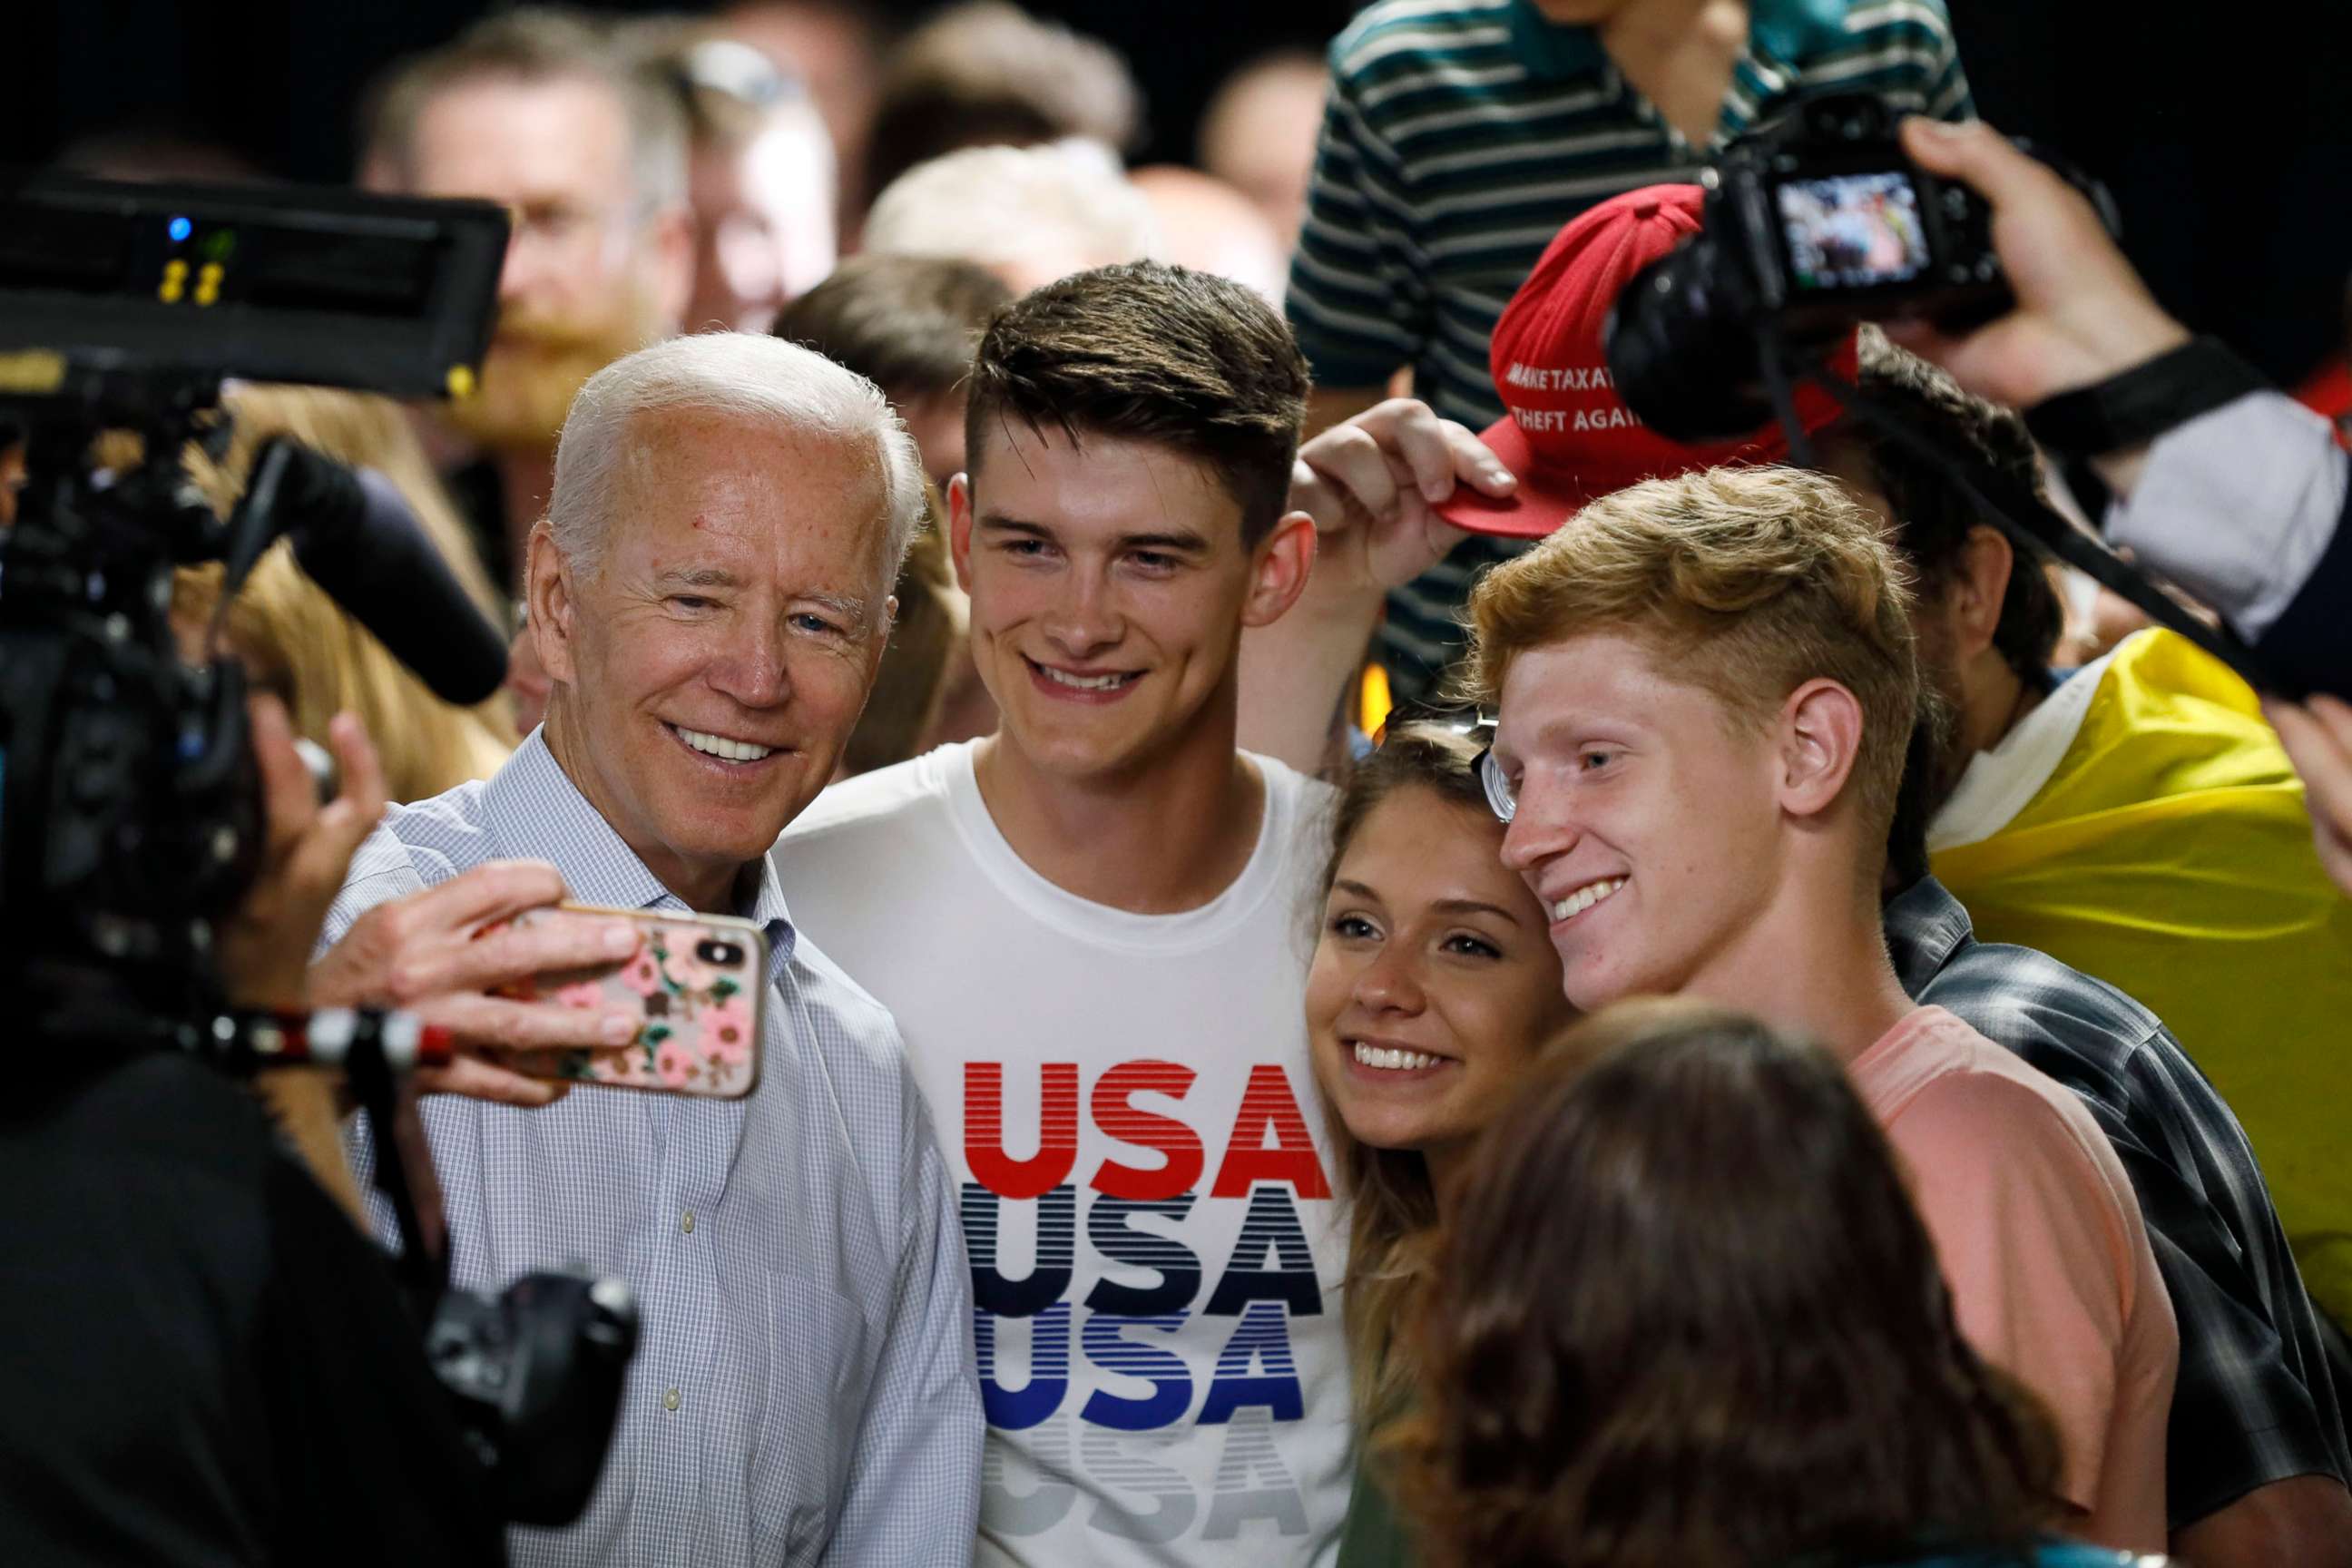 PHOTO: Democratic presidential candidate and former Vice President Joe Biden poses for a photo with audience members during a community event, July 17, 2019, in Council Bluffs, Iowa.